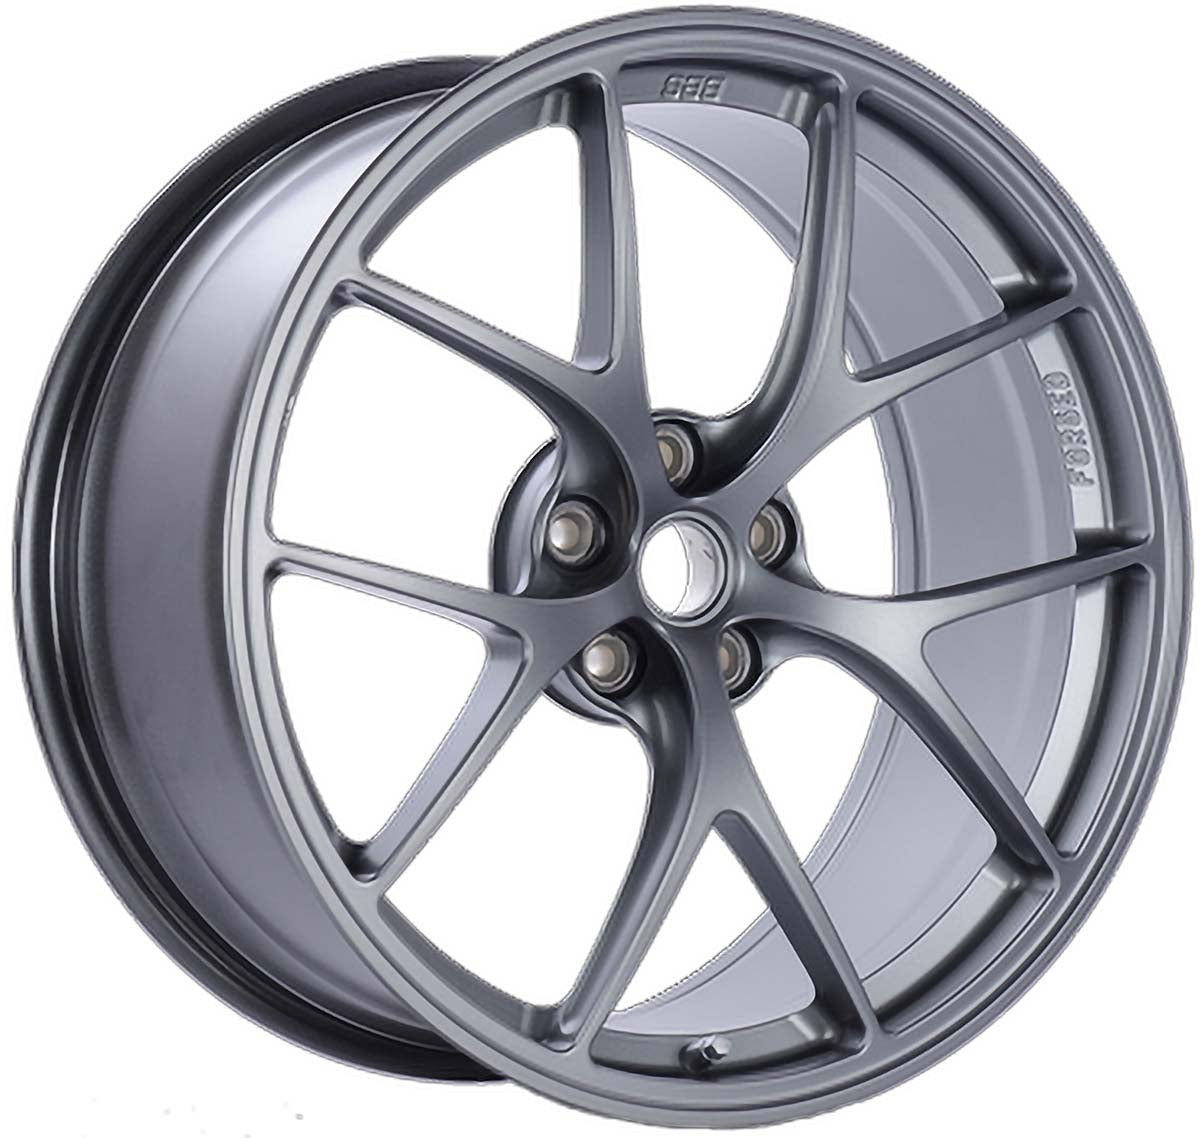 BBS FI Ferrari Forged Line Exclusive Series Wheels - Competition Motorsport